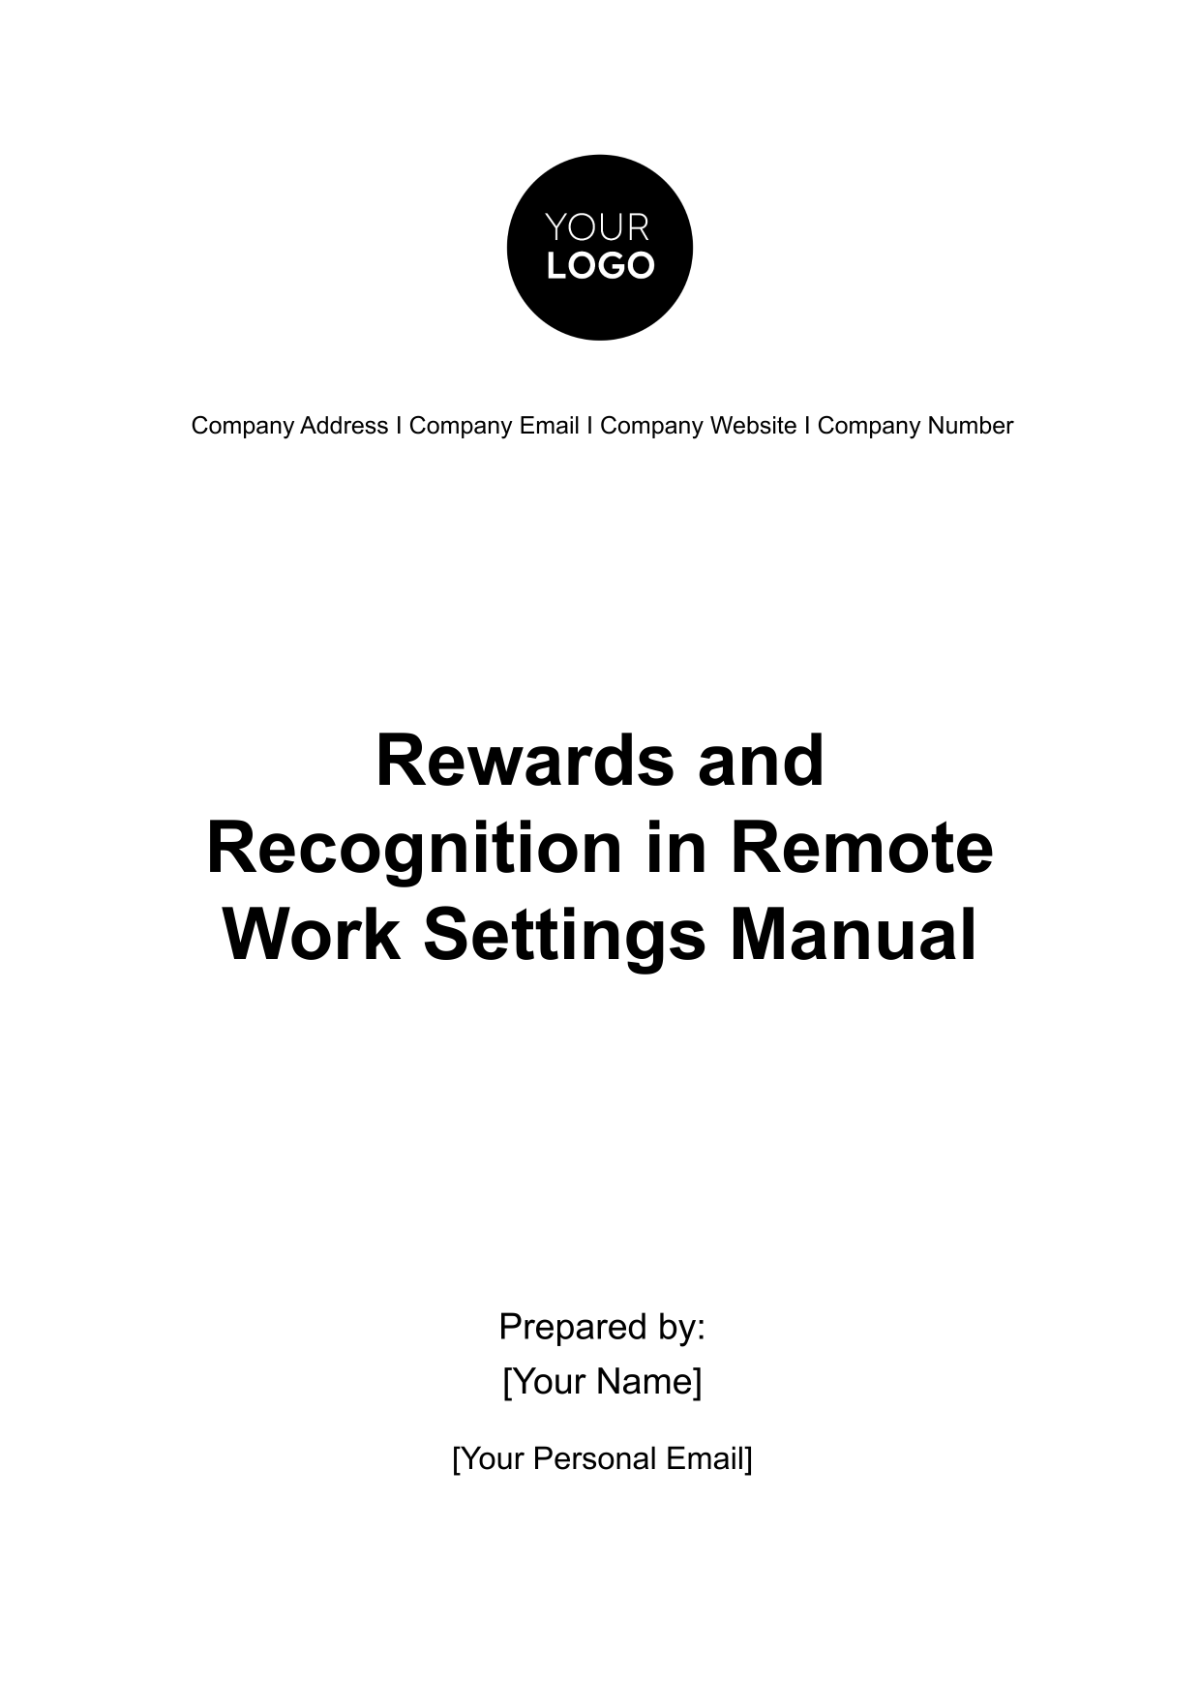 Free Rewards and Recognition in Remote Work Settings Manual HR Template